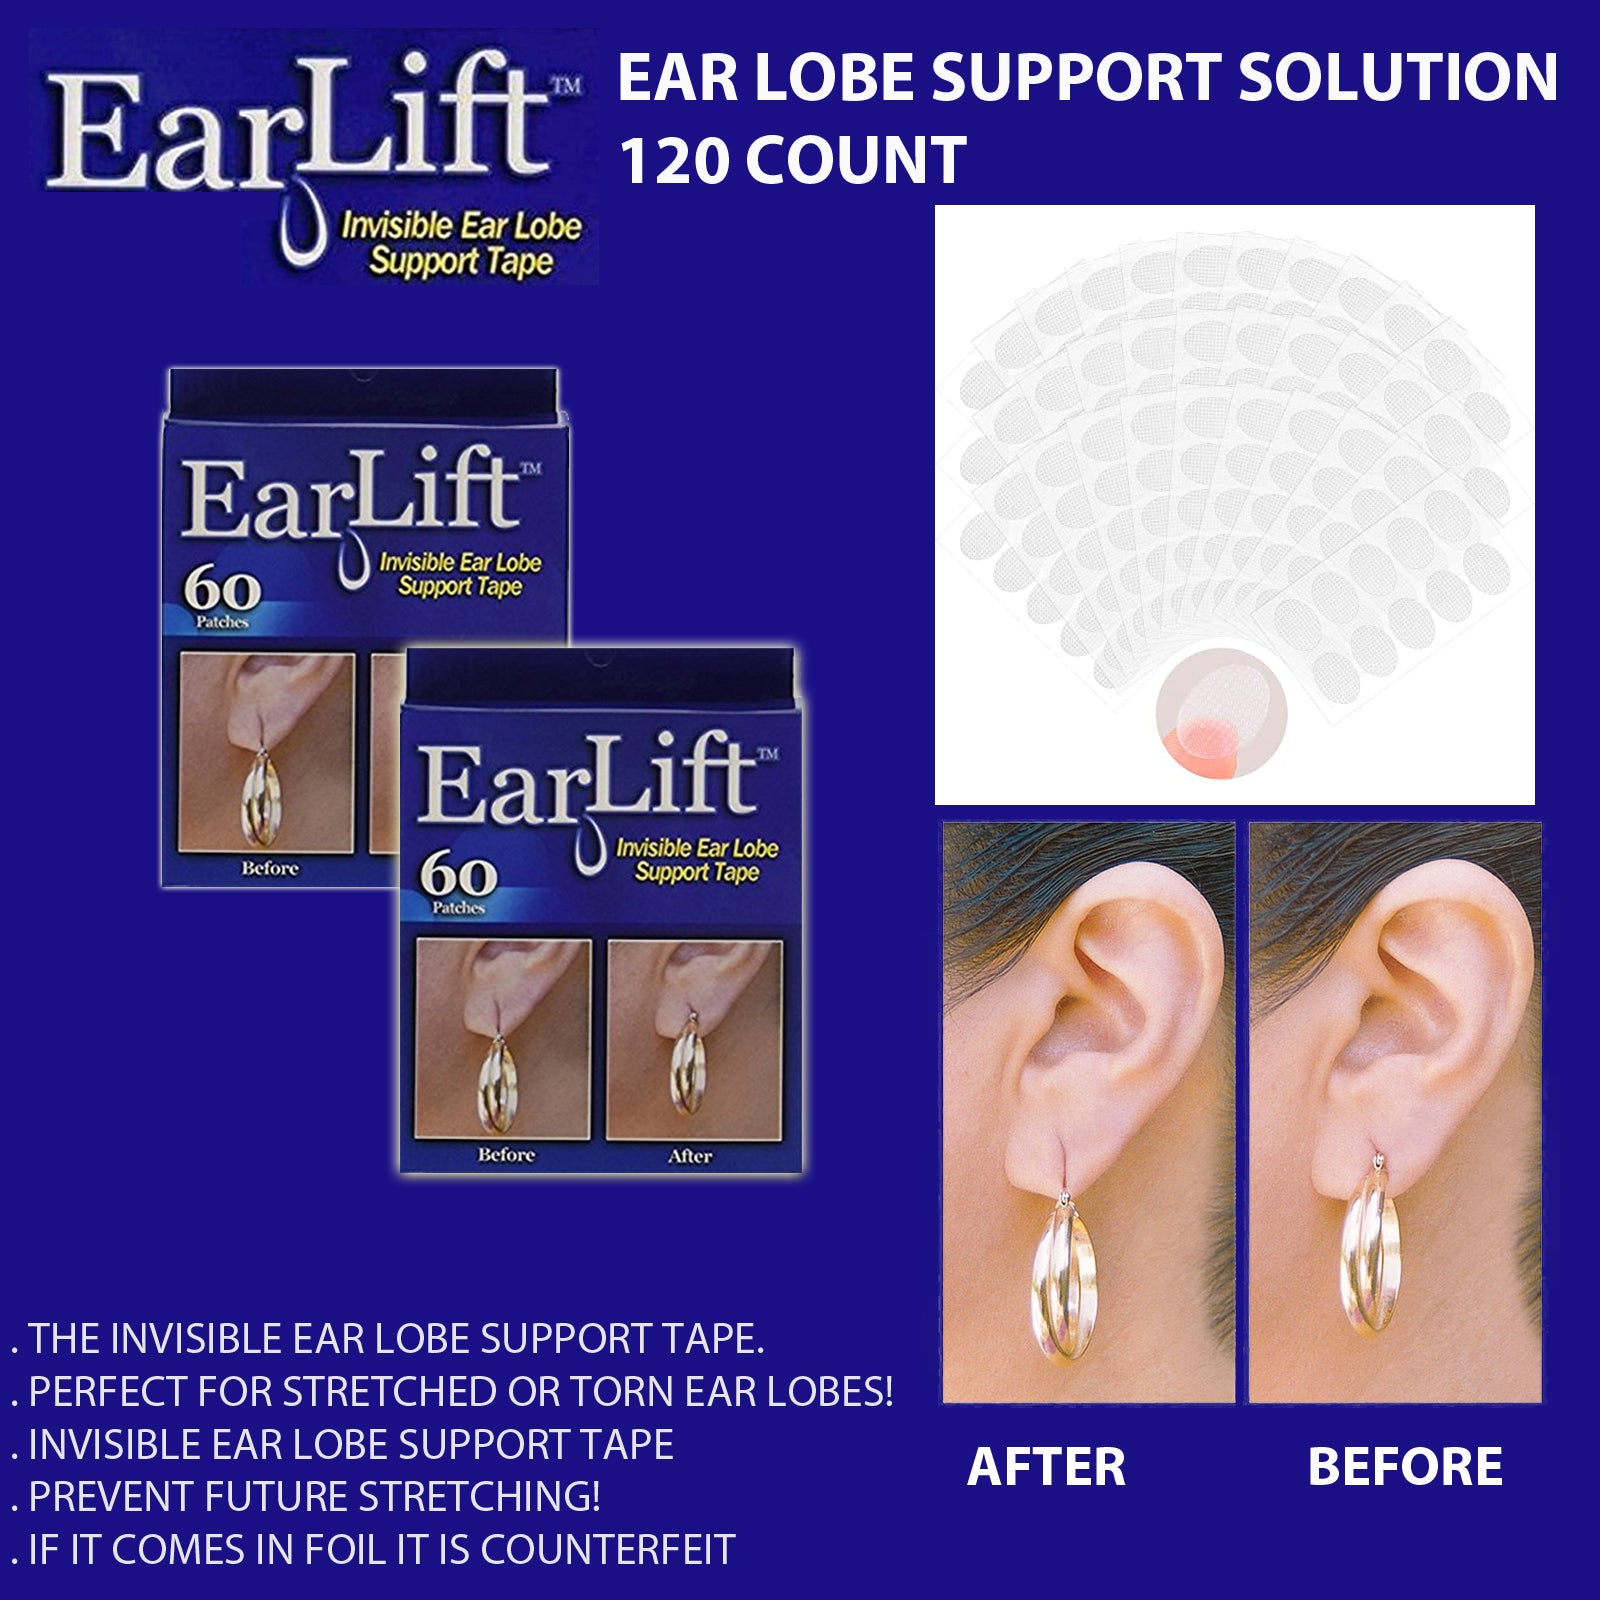 Tips to prevent dangling earlobes